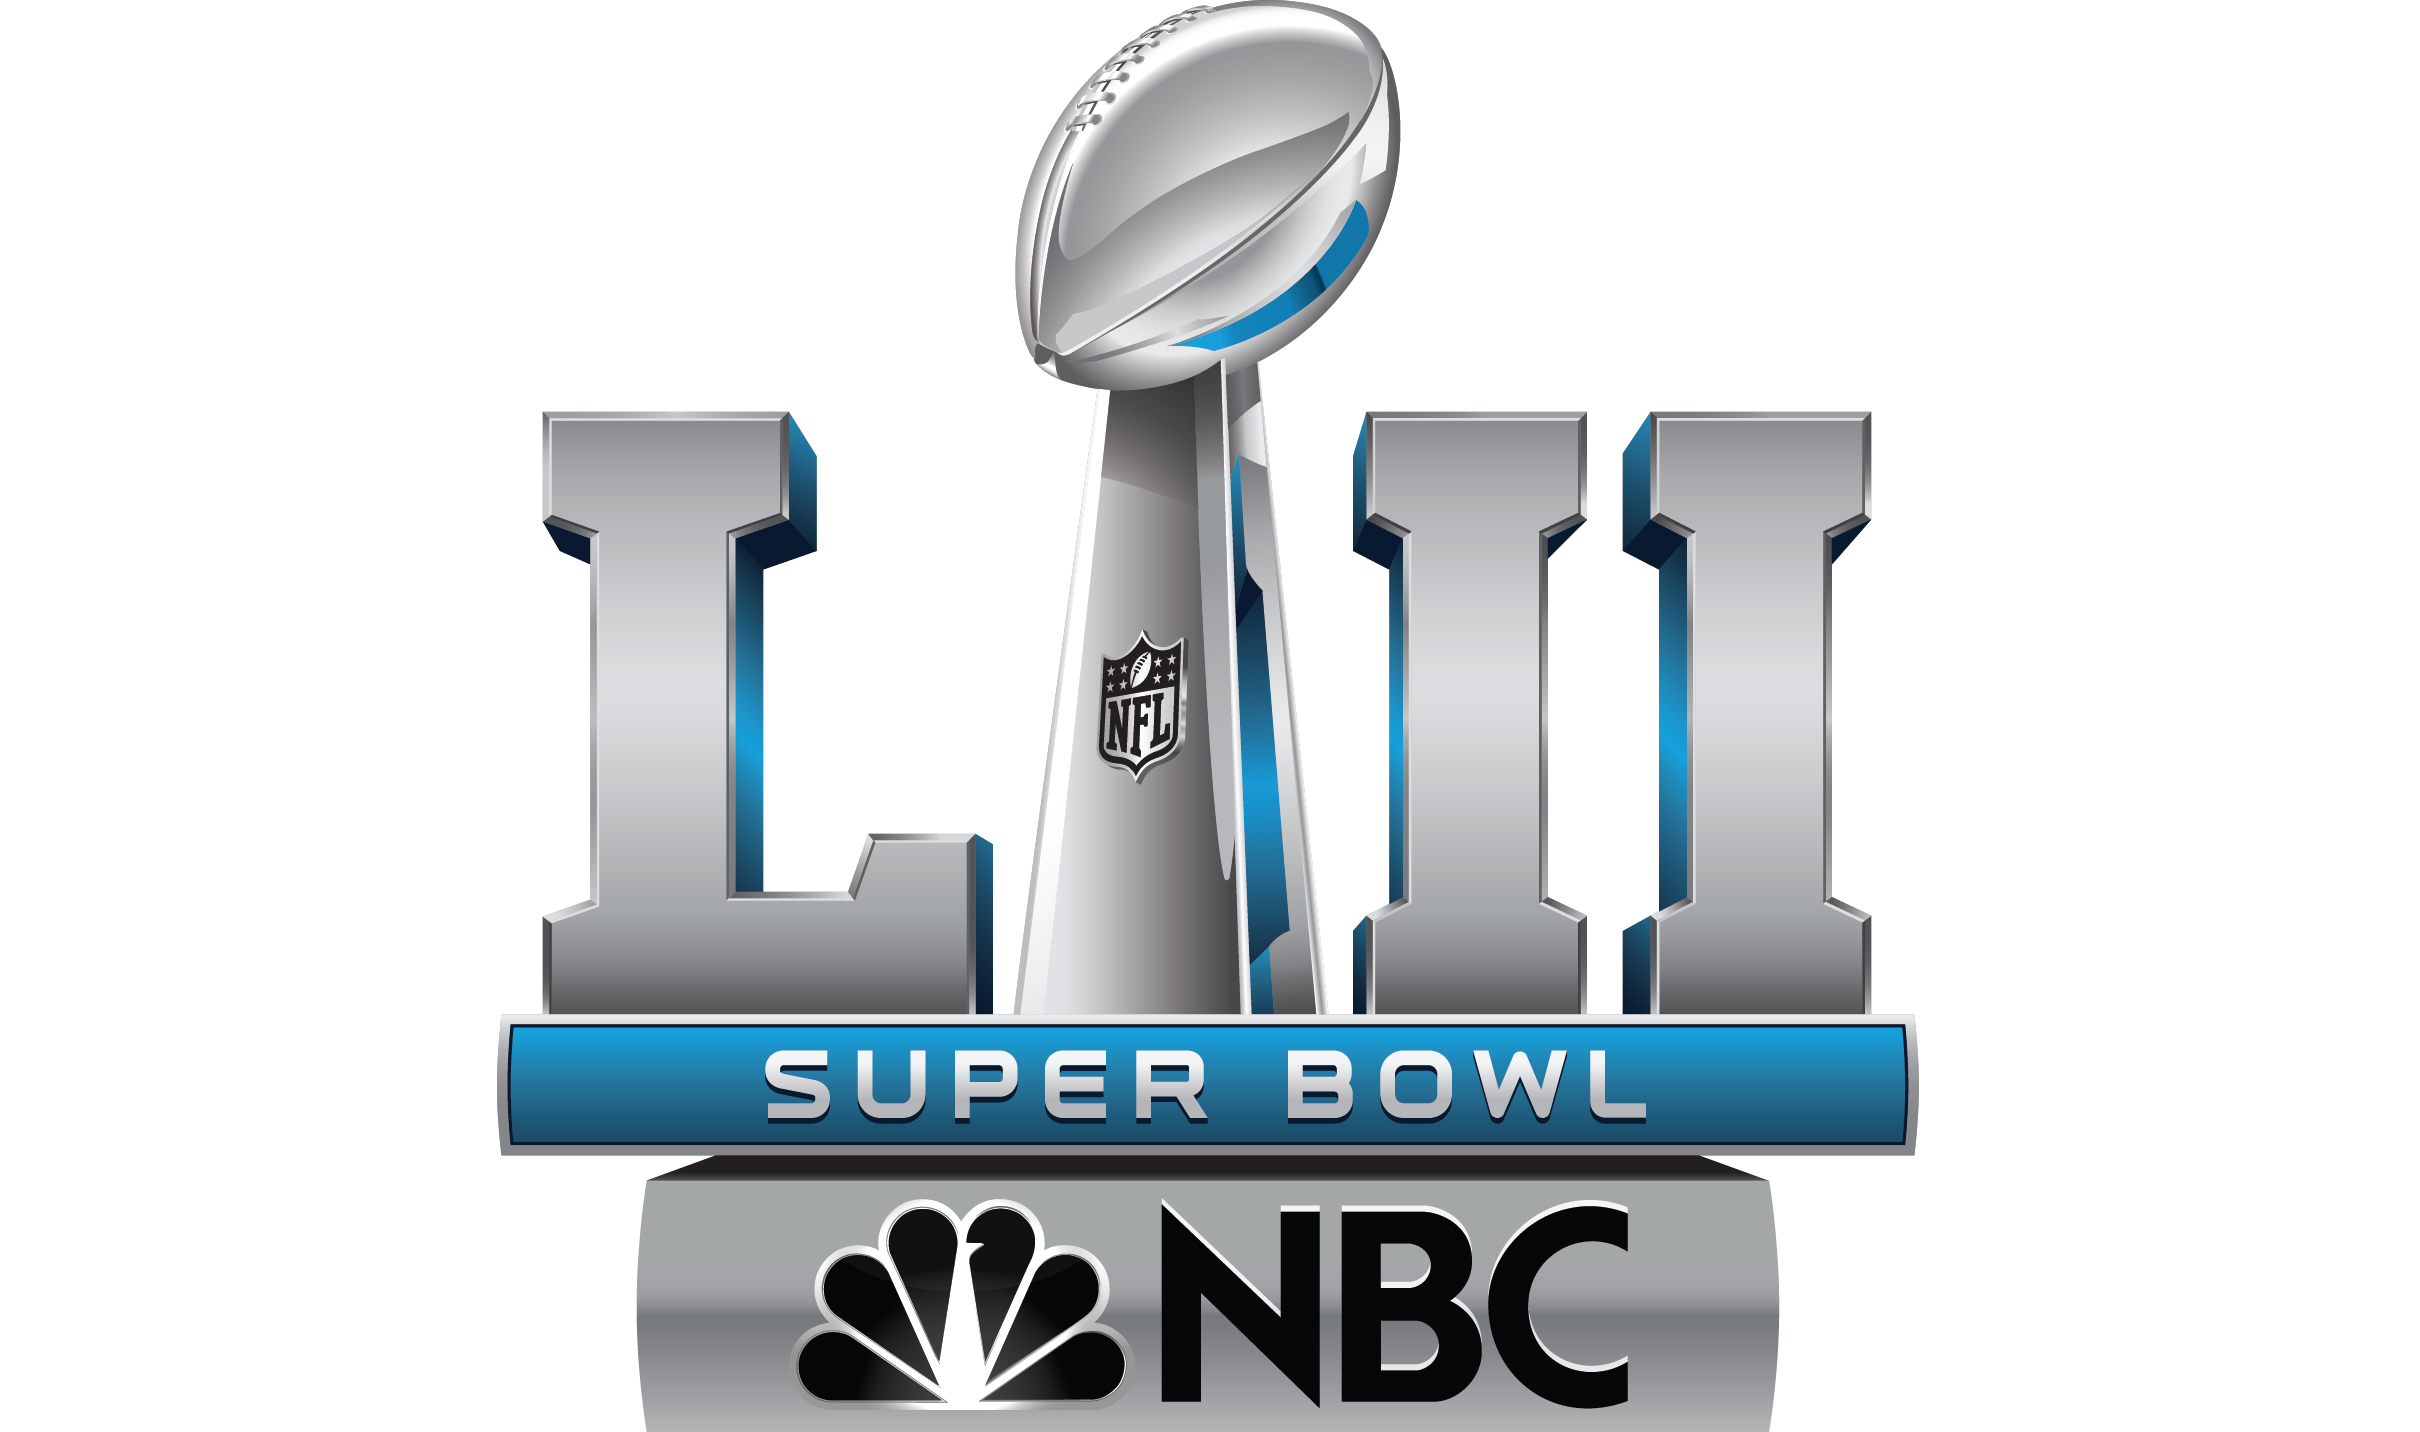 Super Bowl LII NBC’s Production of The Big Game By the Numbers